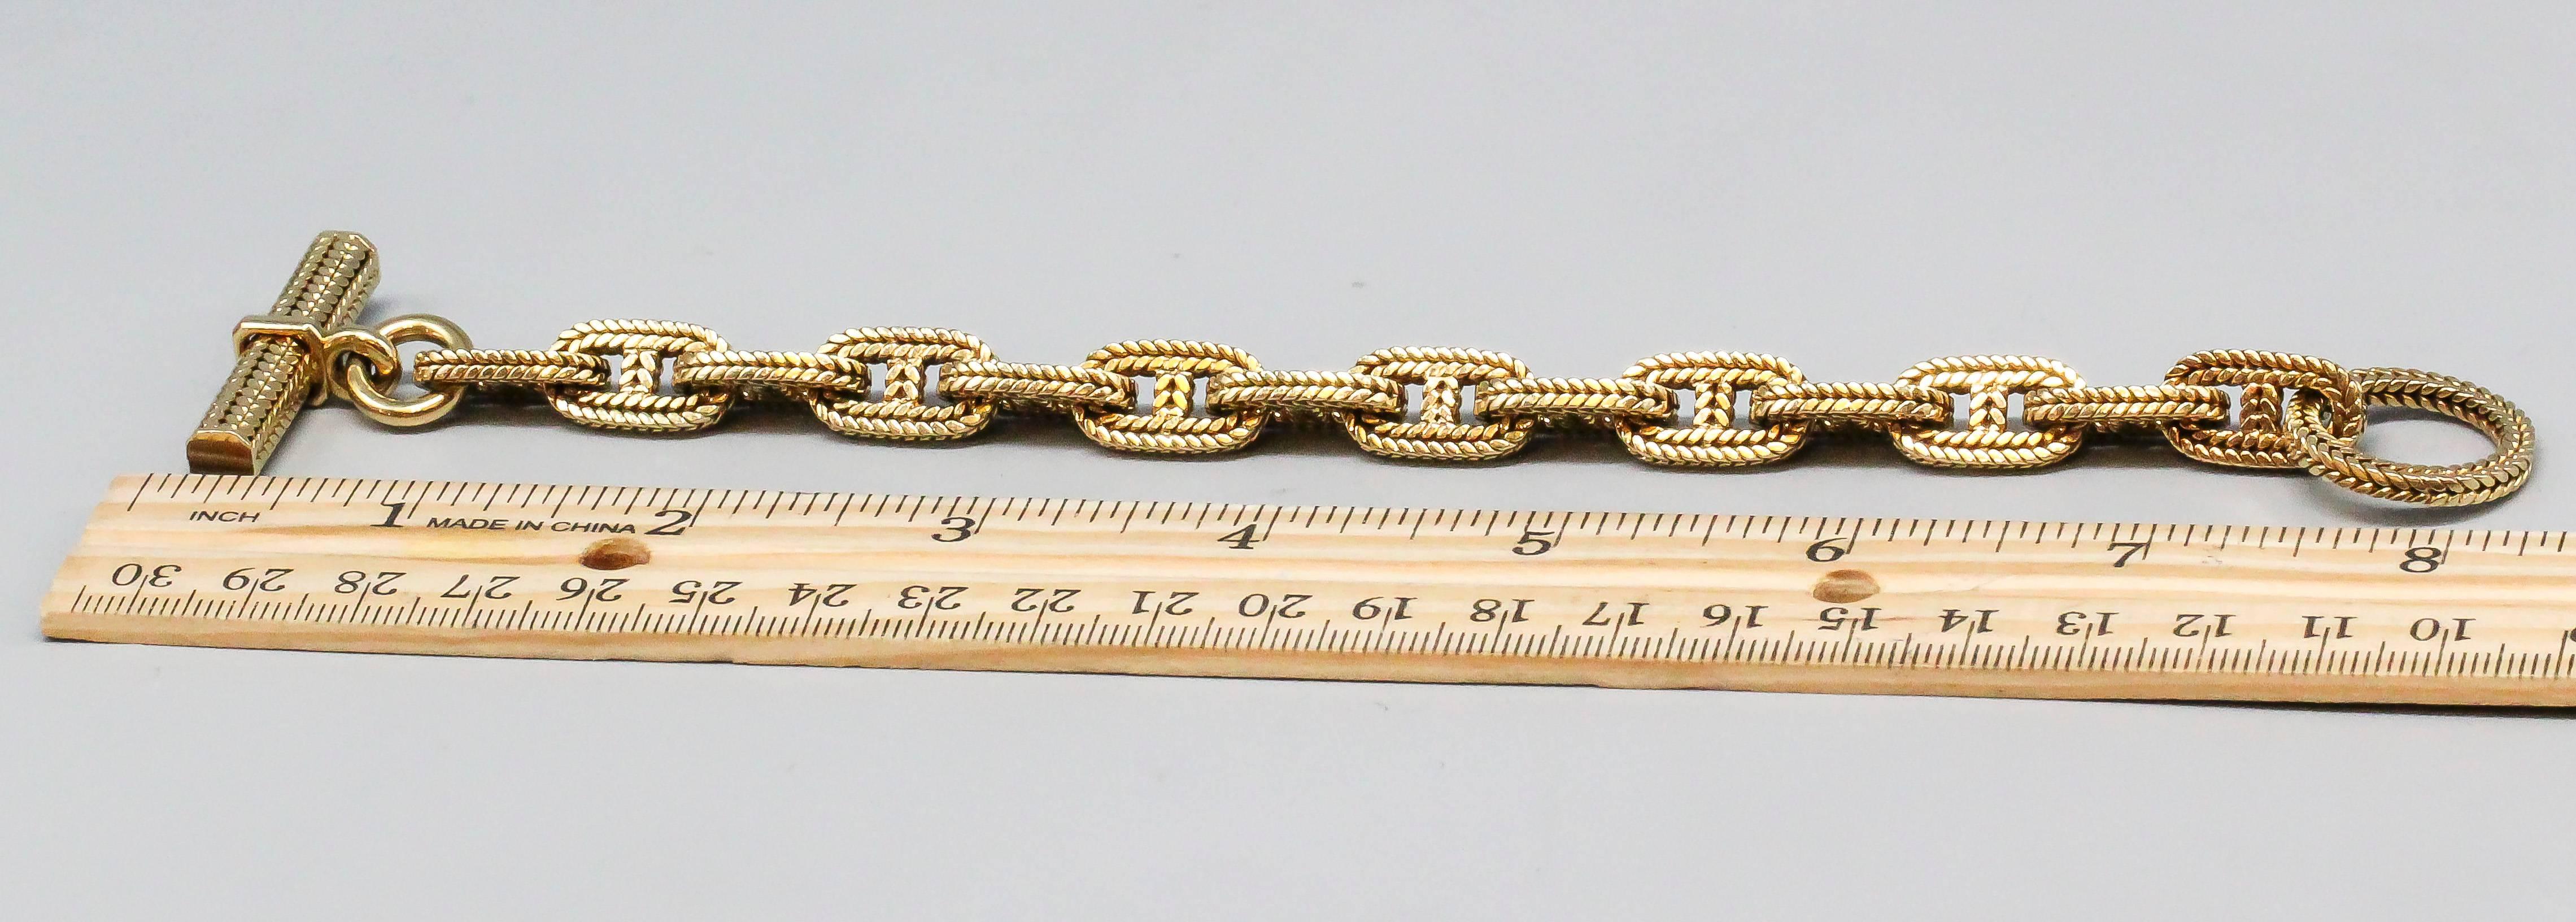 Timelessly elegant braided gold link bracelet by George L'Enfant for Hermes, circa 1960s. This classic bracelet shown is the medium size, weighing 68.1 grams and measuring over 8 inches in length.

Hallmarks: Hermes Paris, maker's mark (G L), and